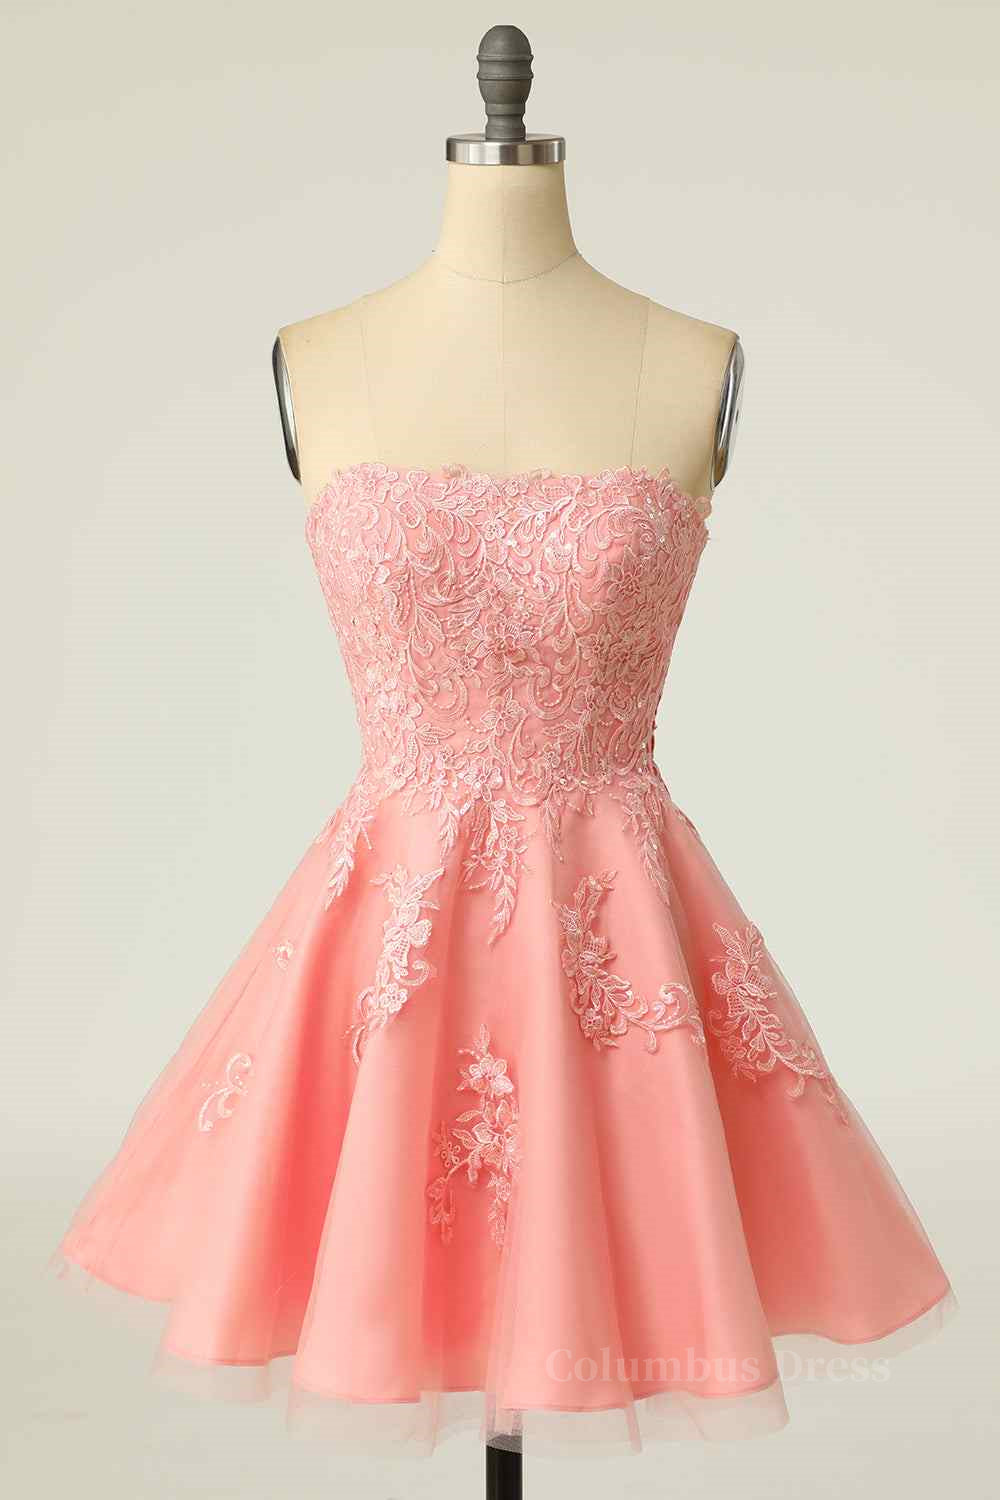 Tights Dress Outfit, Pink A-line Strapless Lace-Up Back Applique Tulle Mini Homecoming Dress